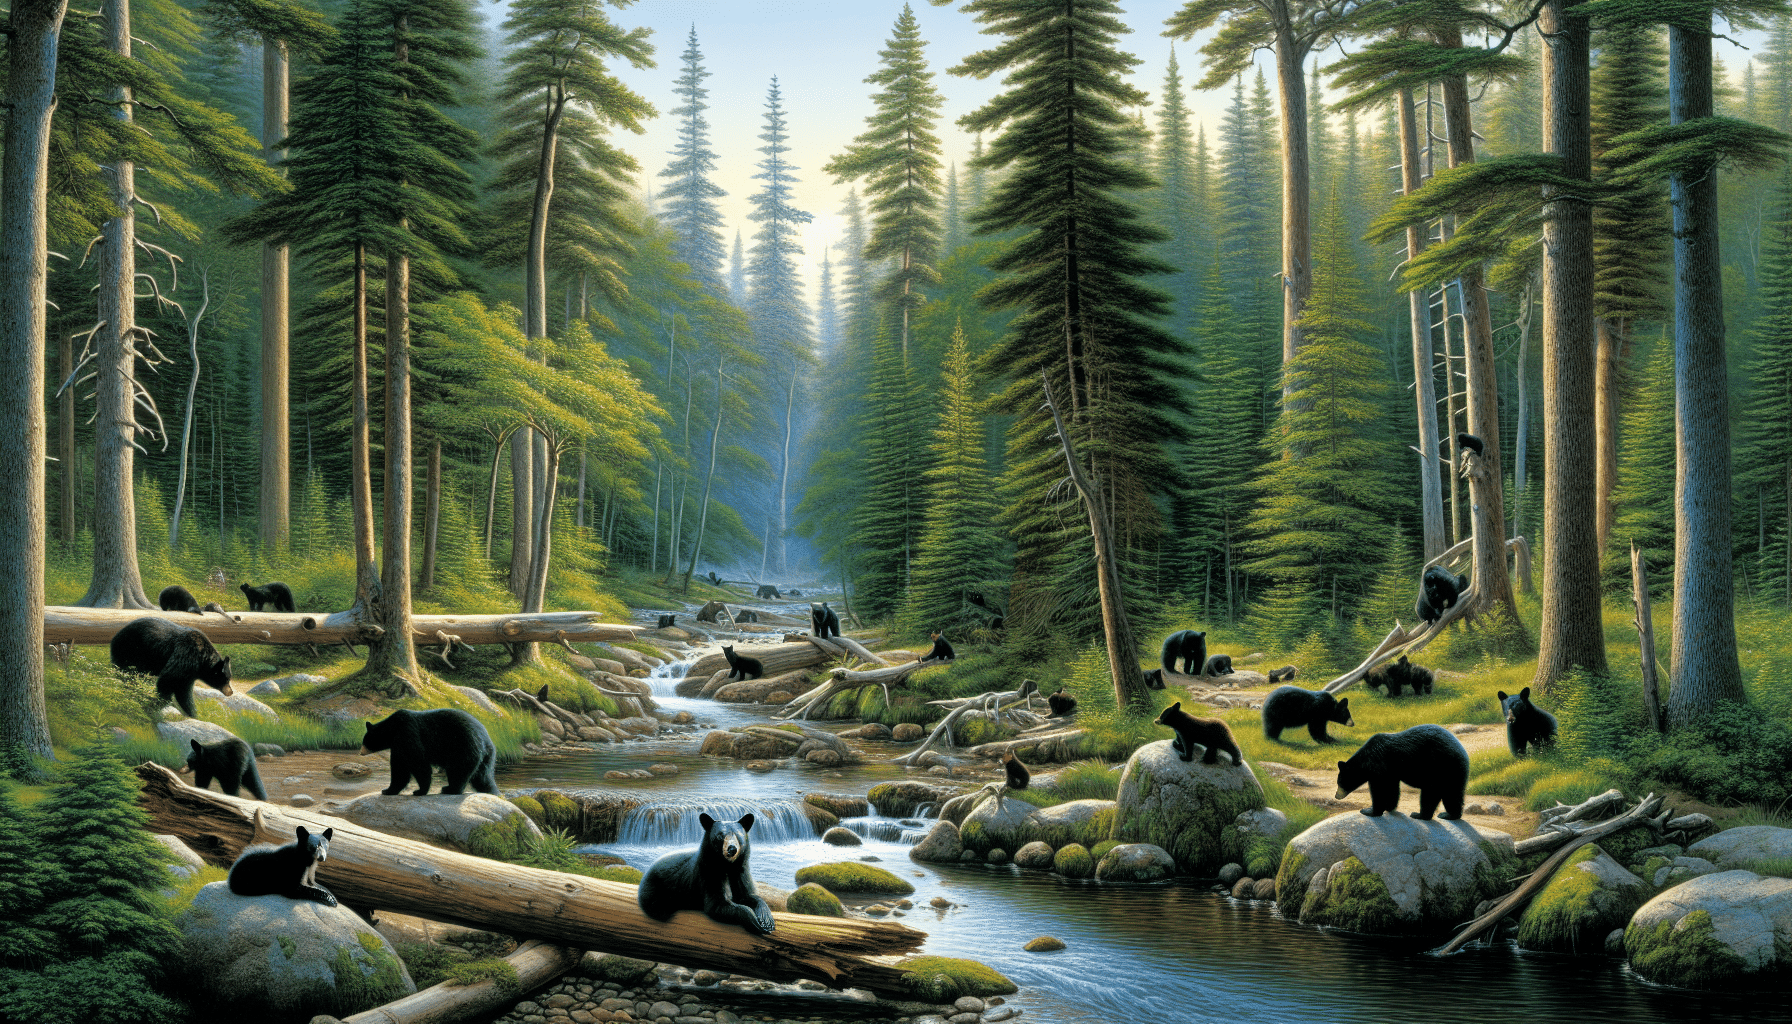 An idyllic wilderness scene set in the dense woods of Maine encapsulating the serene beauty of nature, with tall pine trees and calm trickling streams. Plentiful black bears can be seen, lounging lazily by the riverside, exploring tree trunks, or playfully interacting within their natural habitat. The landscape should be devoid of human presence, brand names, logos, as well as any form of text within the image or on any items. Immerse viewers in this tranquil habitat highlighting the estimated population of black bears without any hint to the prompt text.